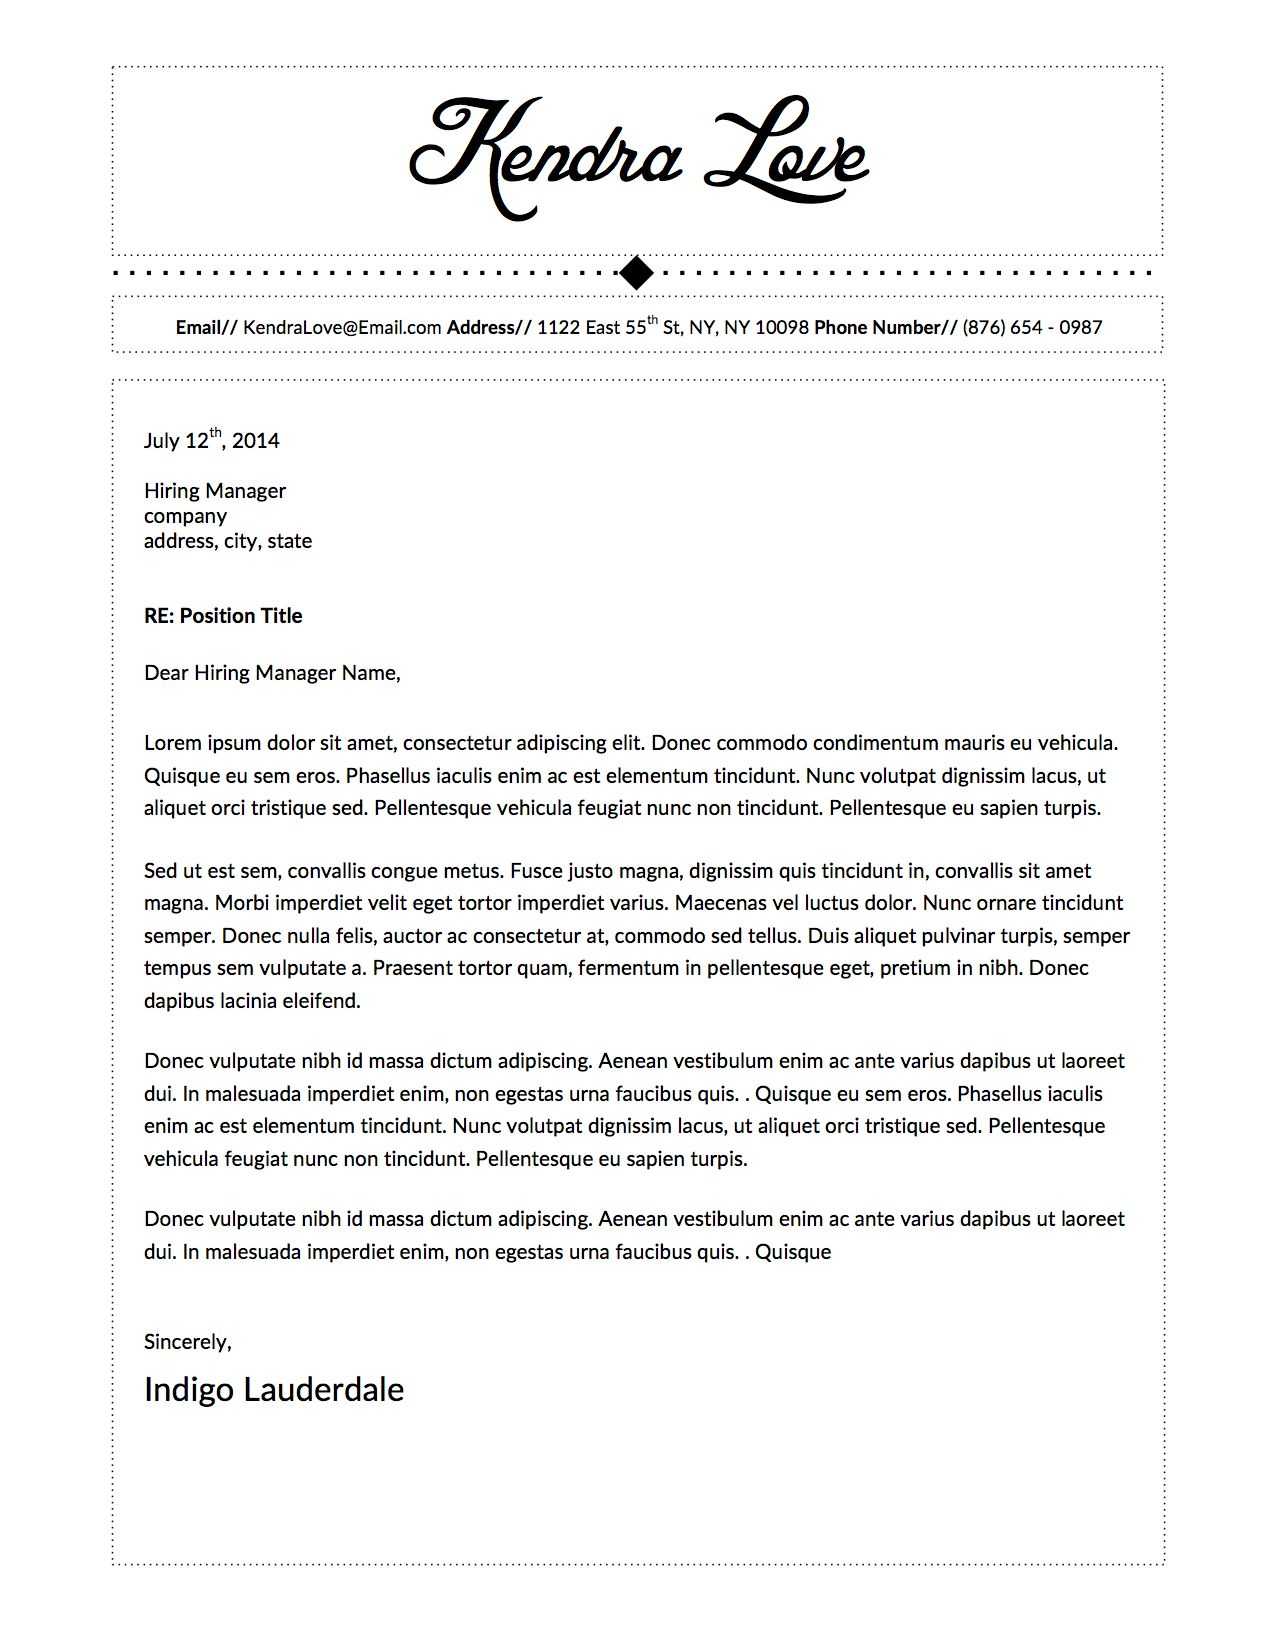 011 Letter Of Interest Template Microsoft Word Sweep11 Ideas With Regard To Letter Of Interest Template Microsoft Word